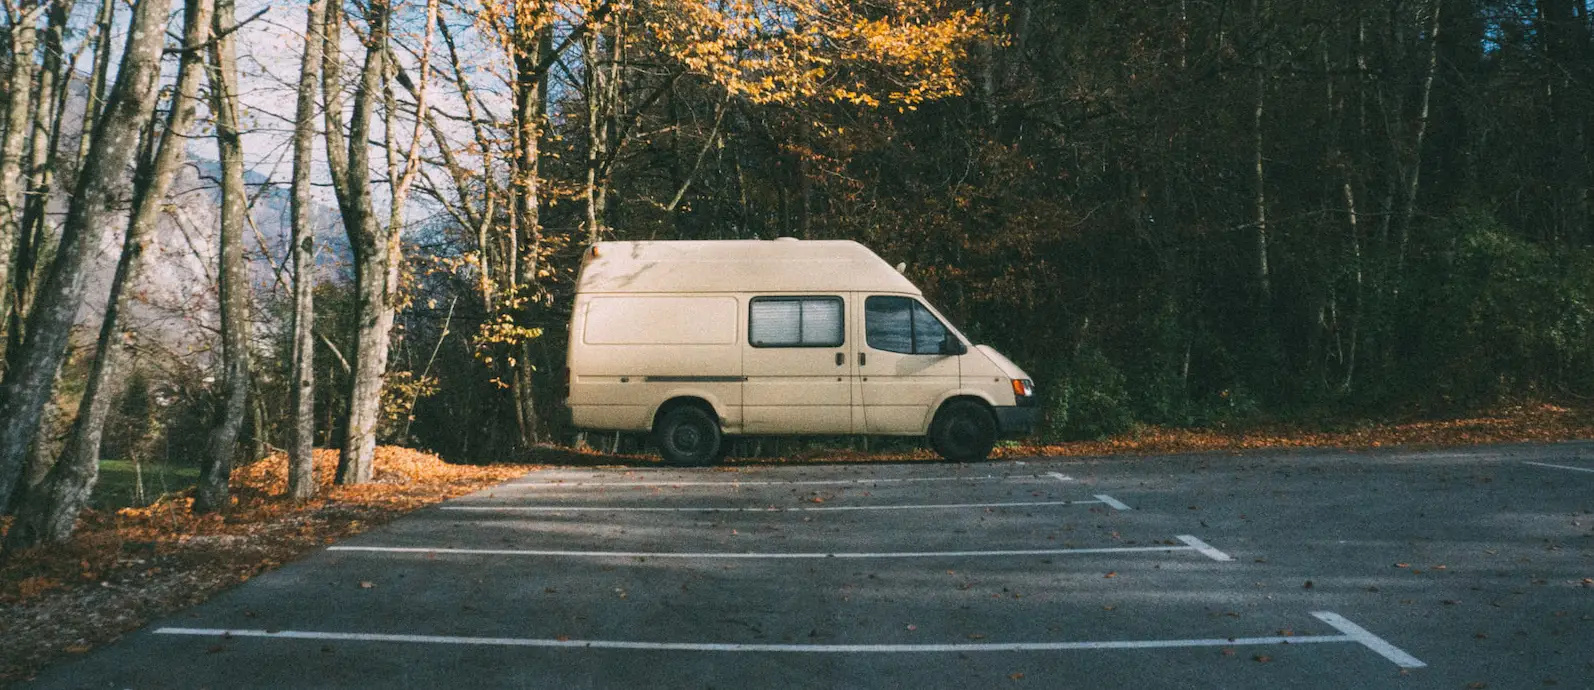 side view of a white van parked in an empty car park surrounded by autumnal trees